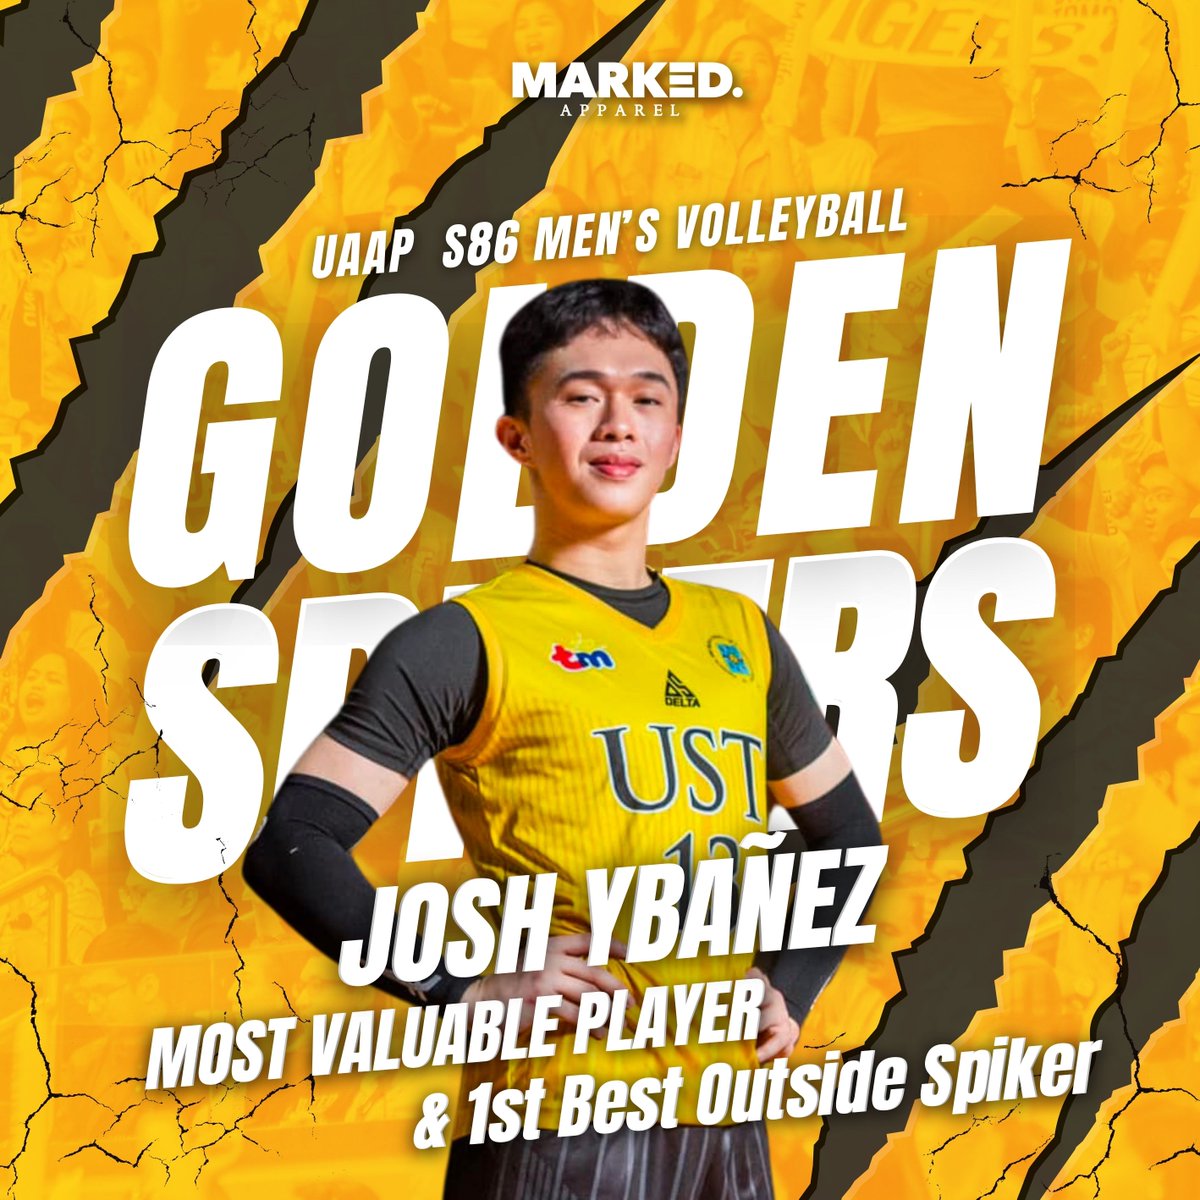 QUEEN THINGS! 👑💛

Congratulations to our very own Josh Ybañez for being named the 1st Best Outside Spiker and Most Valuable Player for UAAP Season 86 Men's Volleyball!

#GoUSTe #UAAPSeason86 #UAAPVolleyball #GetMarkedNow #USTvsNU #UAAPFinals